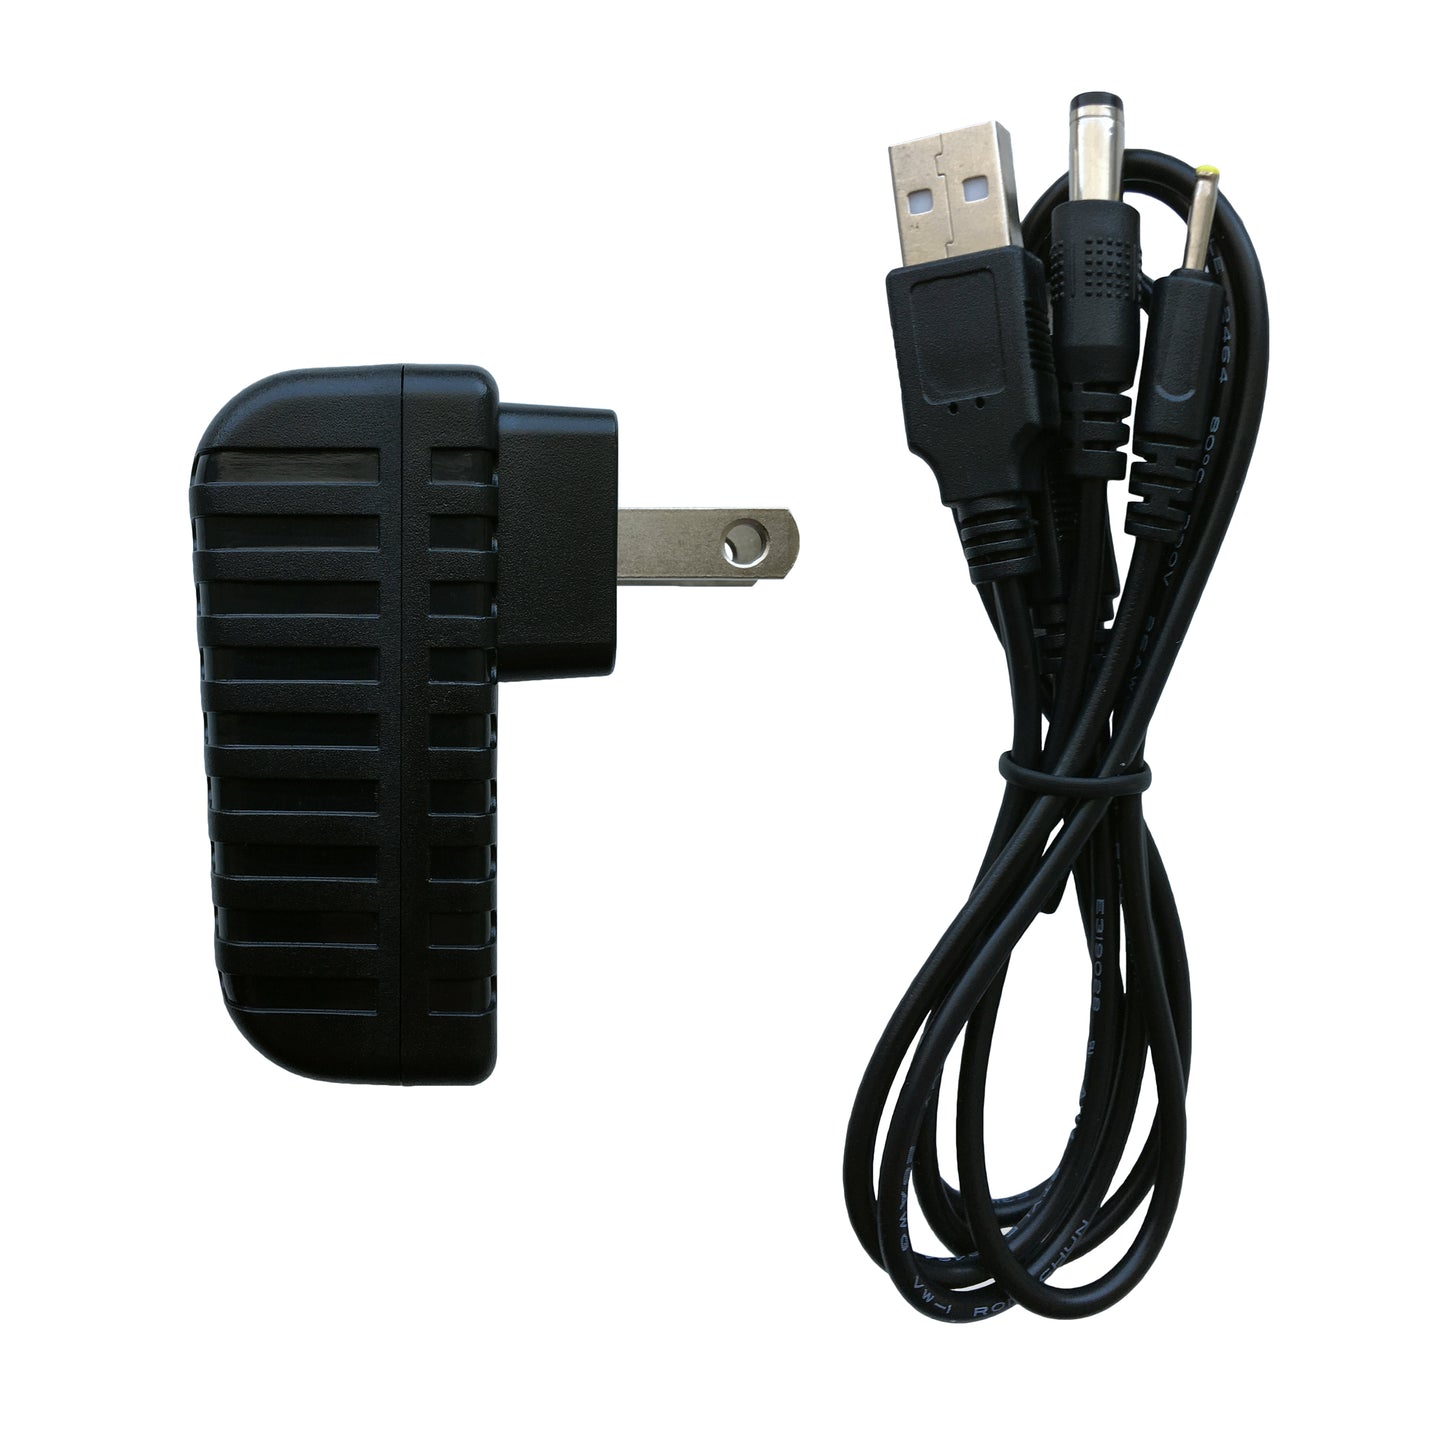 USB Charger for M86-1, M86-2, M86N, P320 - PetSpy